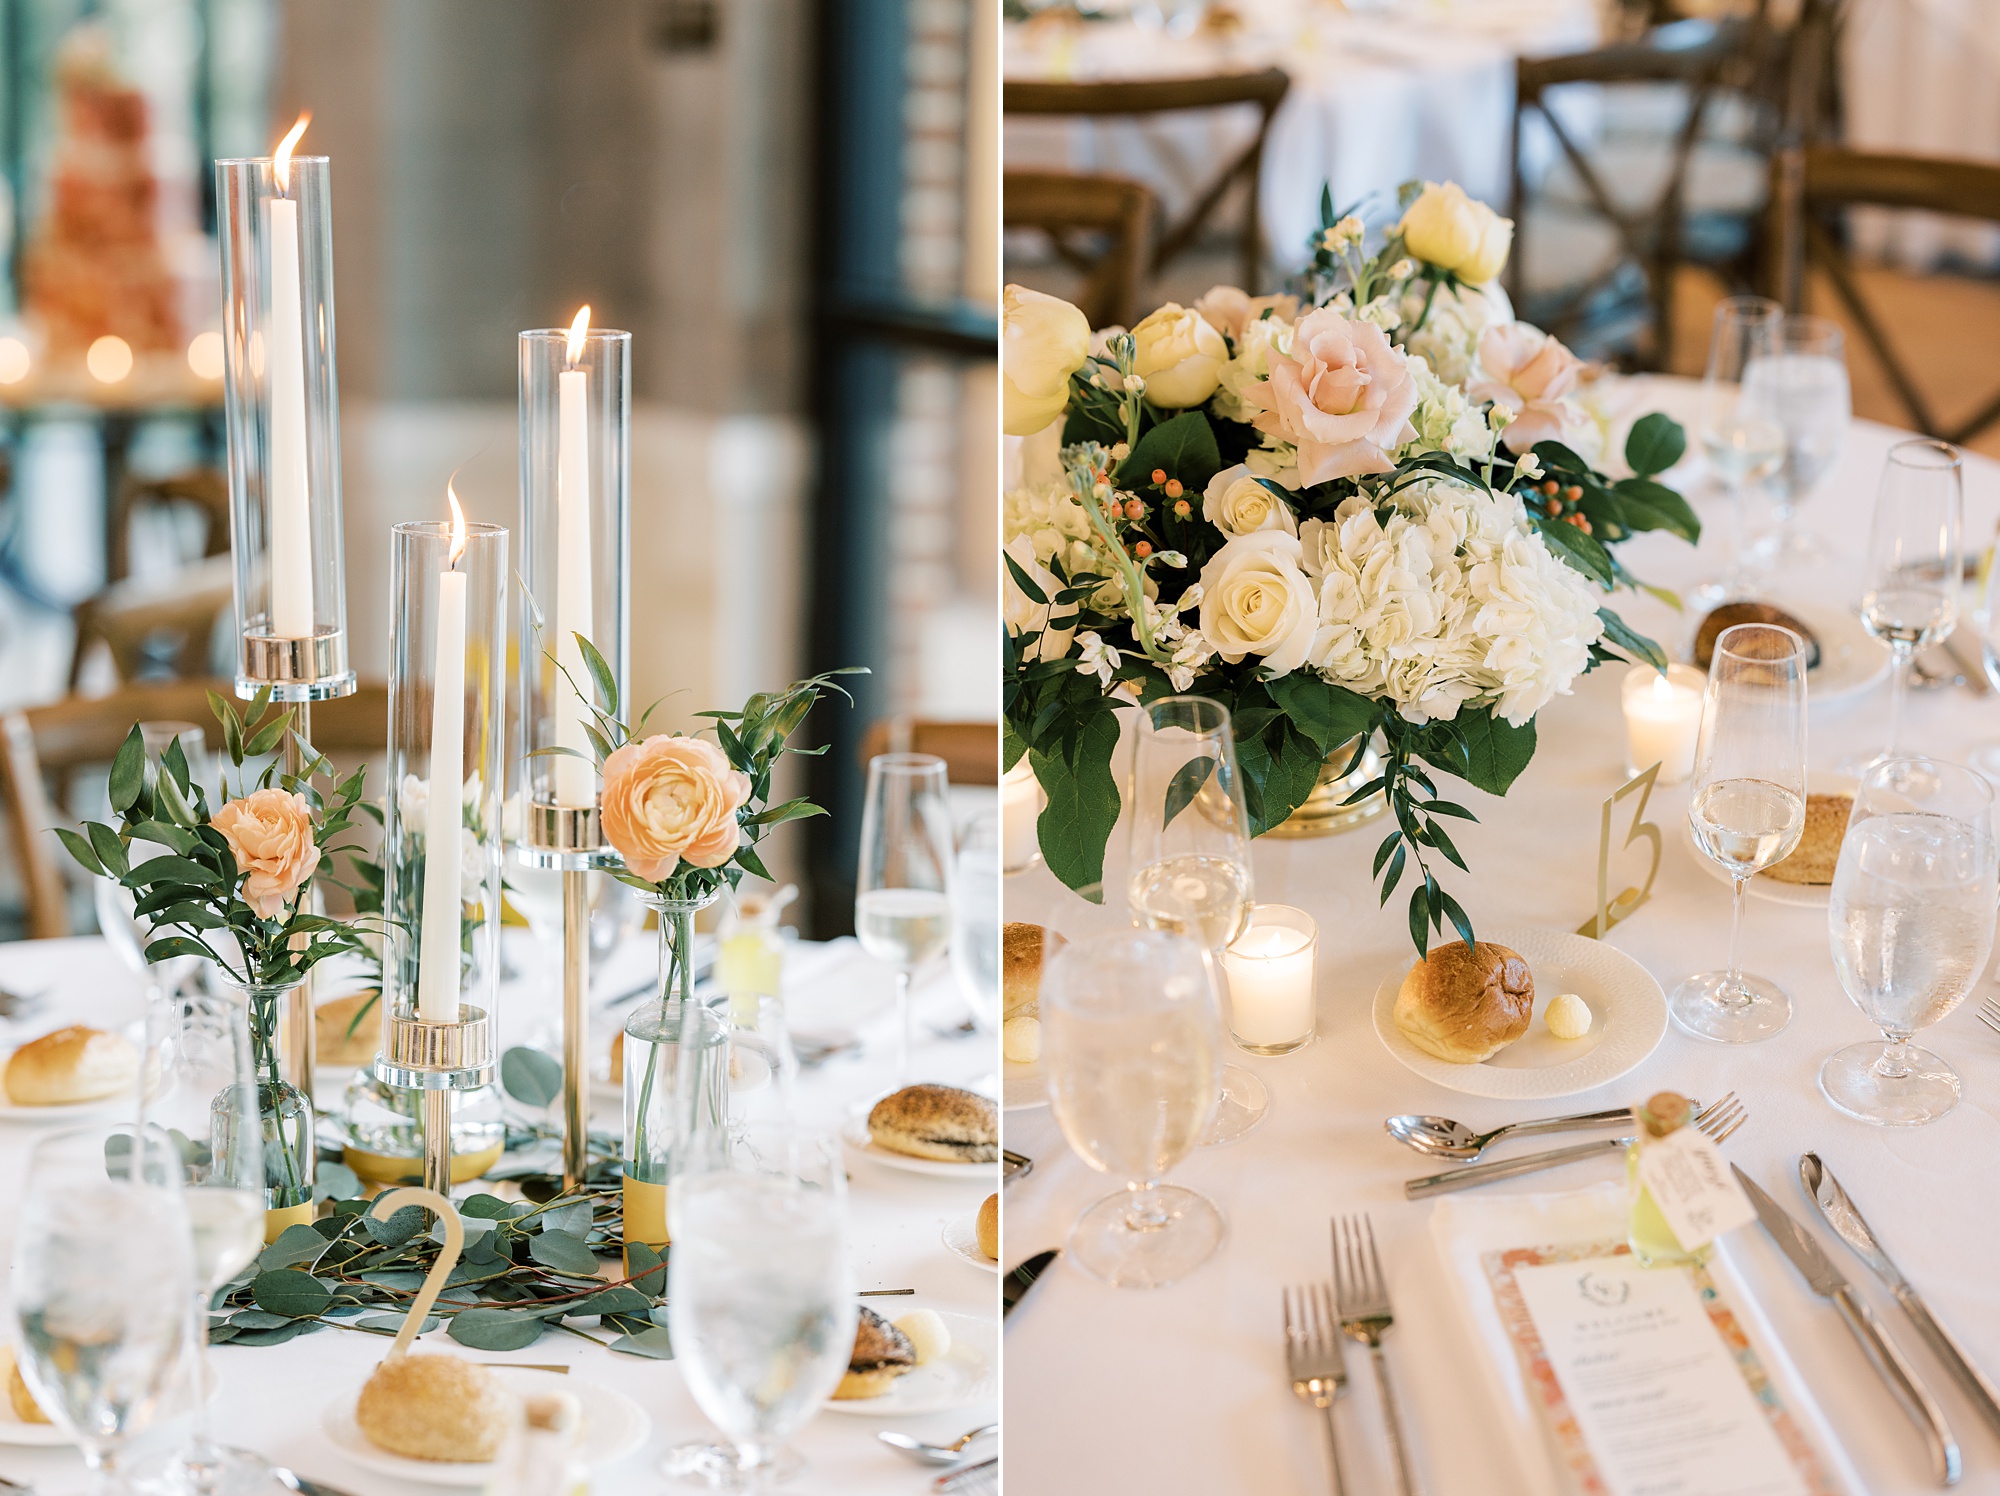 Italian inspired wedding reception at The River House at Odette's with peach and white floral centerpieces 